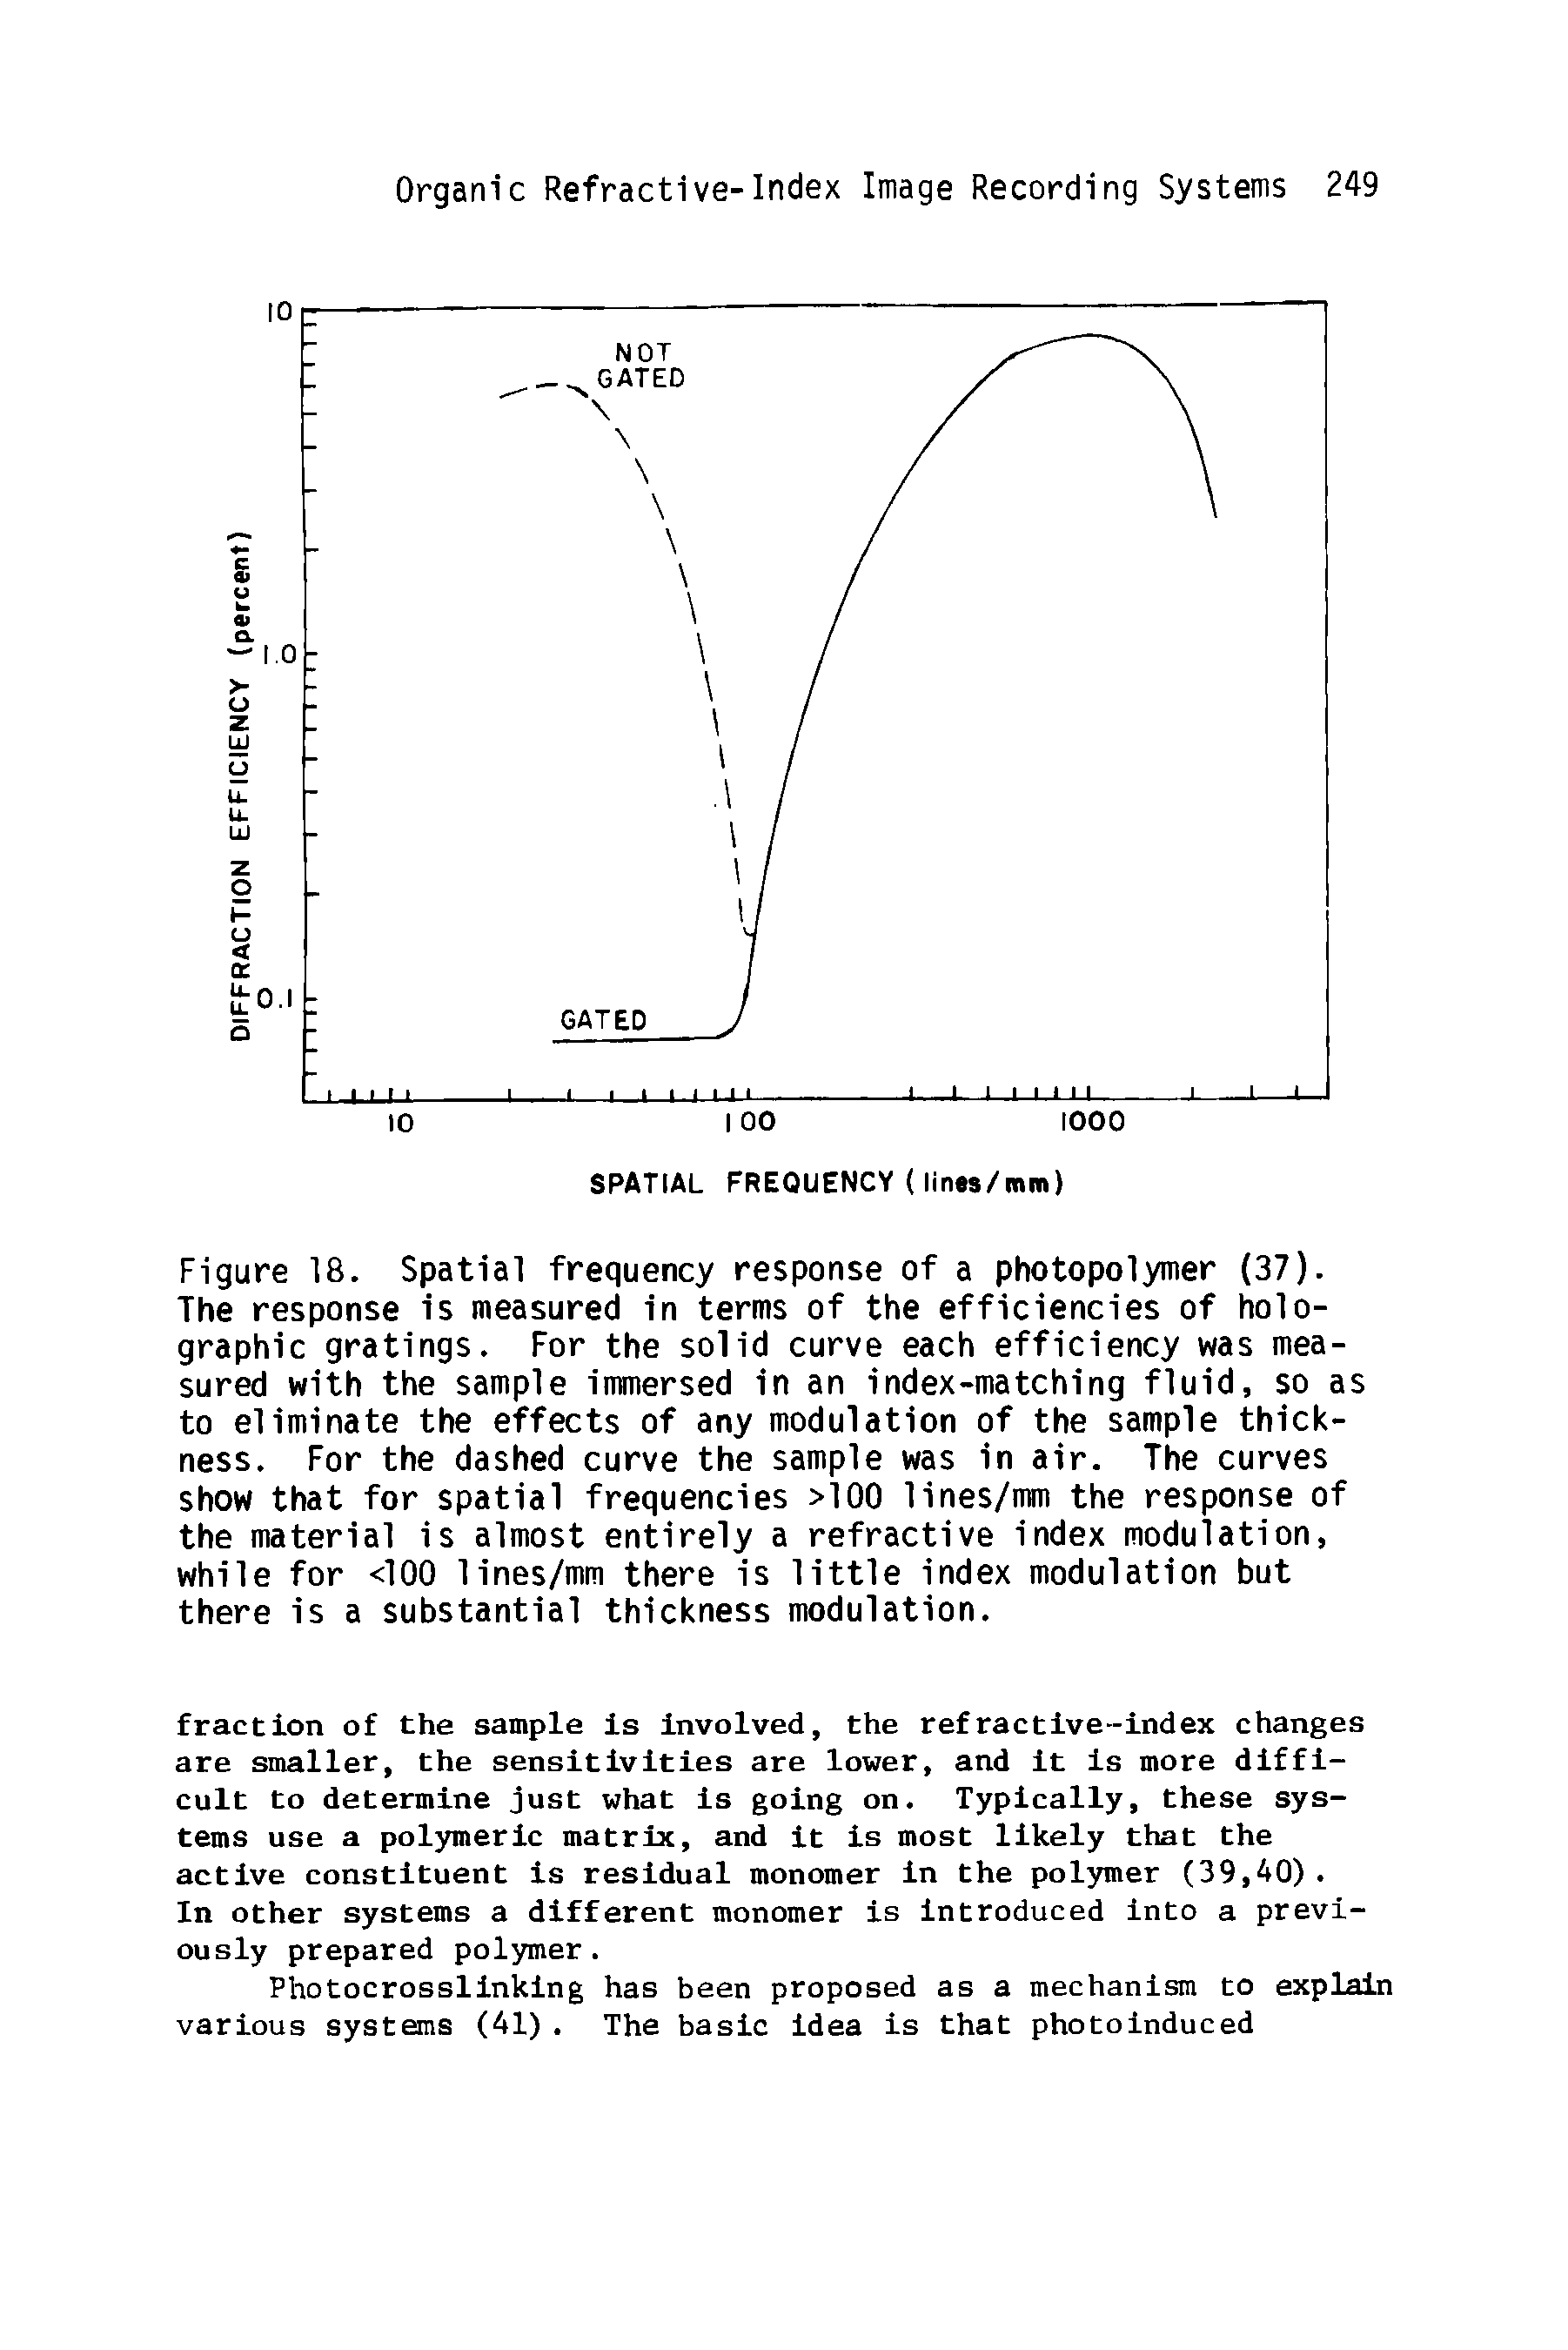 Figure 18. Spatial frequency response of a photopolymer (37). The response is measured in terms of the efficiencies of holographic gratings. For the solid curve each efficiency was measured with the sample immersed in an index-matching fluid, so as to eliminate the effects of any modulation of the sample thickness. For the dashed curve the sample was in air. The curves show that for spatial frequencies >100 lines/mm the response of the material is almost entirely a refractive index modulation, while for <100 lines/mm there is little index modulation but there is a substantial thickness modulation.